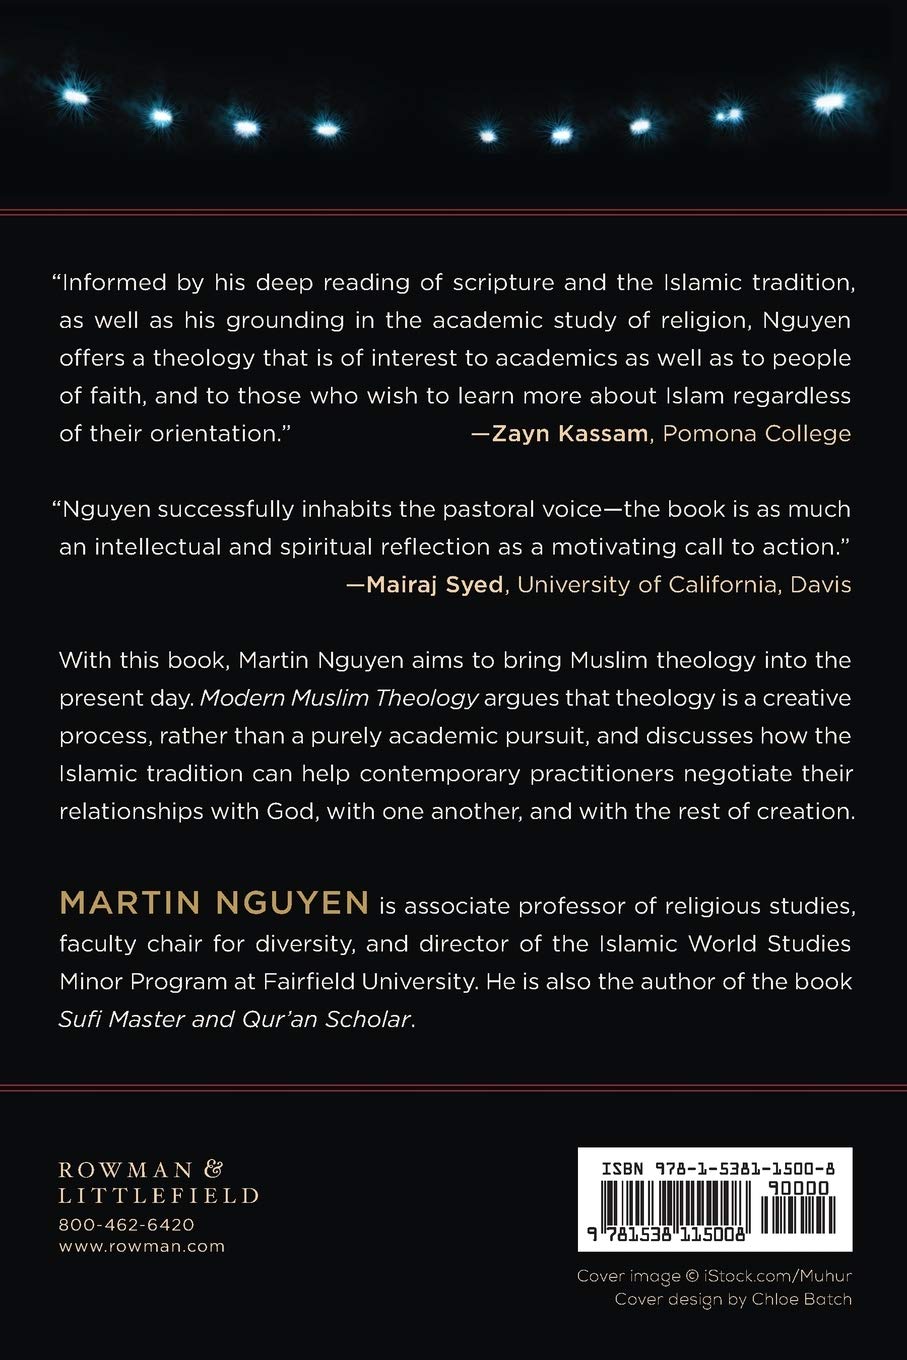 Modern Muslim Theology: Engaging God and the World with Faith and Imagination - Martin Nguyen